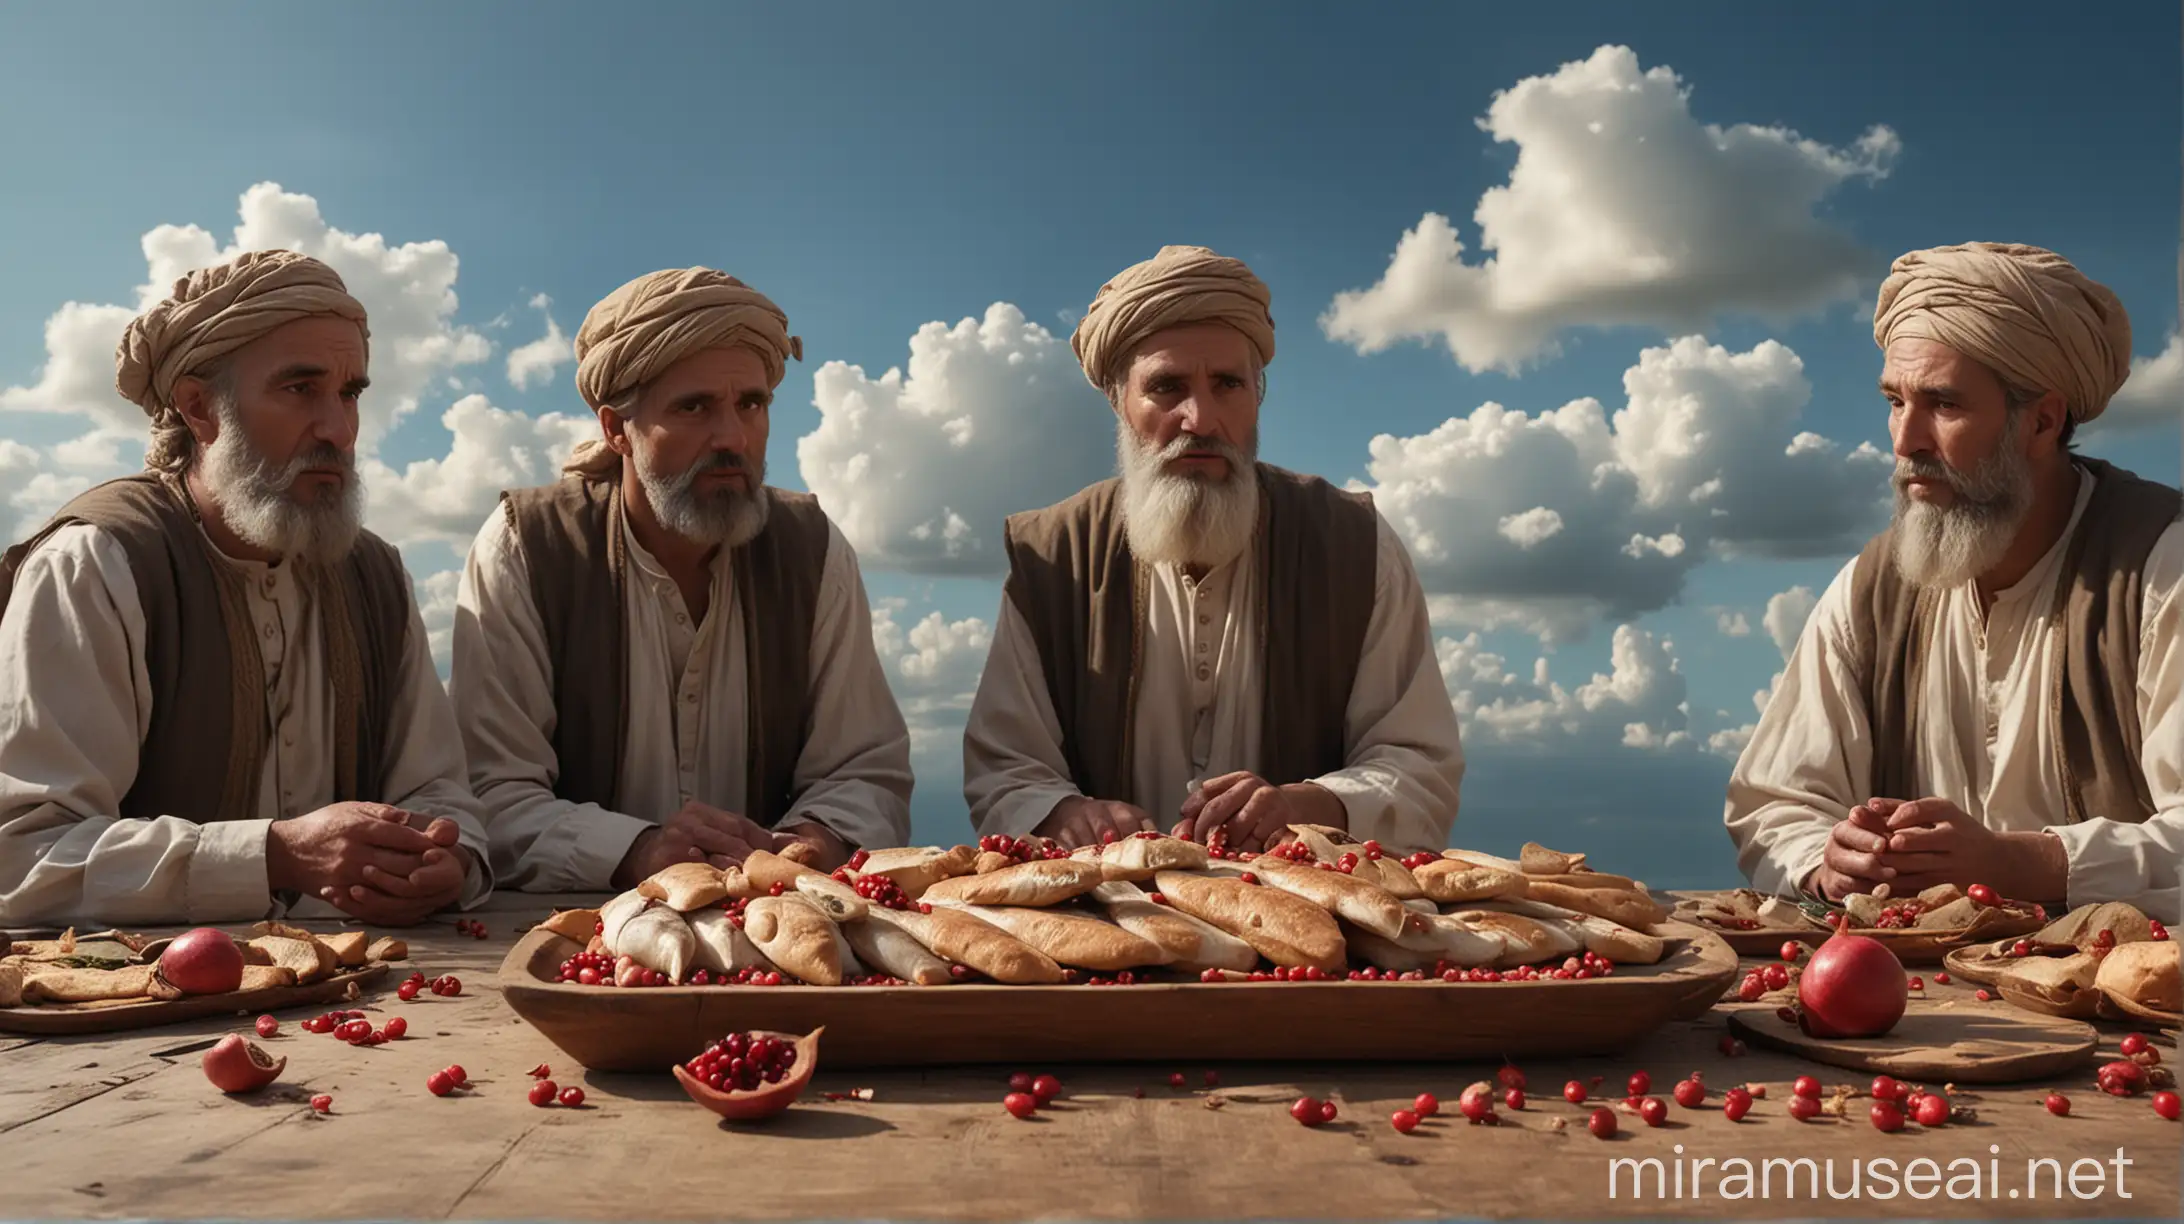 A wooden dining table with a lot of huge fish, loaves of bread, and some pomegranate seeds. Three men from the time of the prophets, dressed in brown, stand at the table. The background of the picture is a blue sky and clouds, a realistic cinematic image, 4K quality.